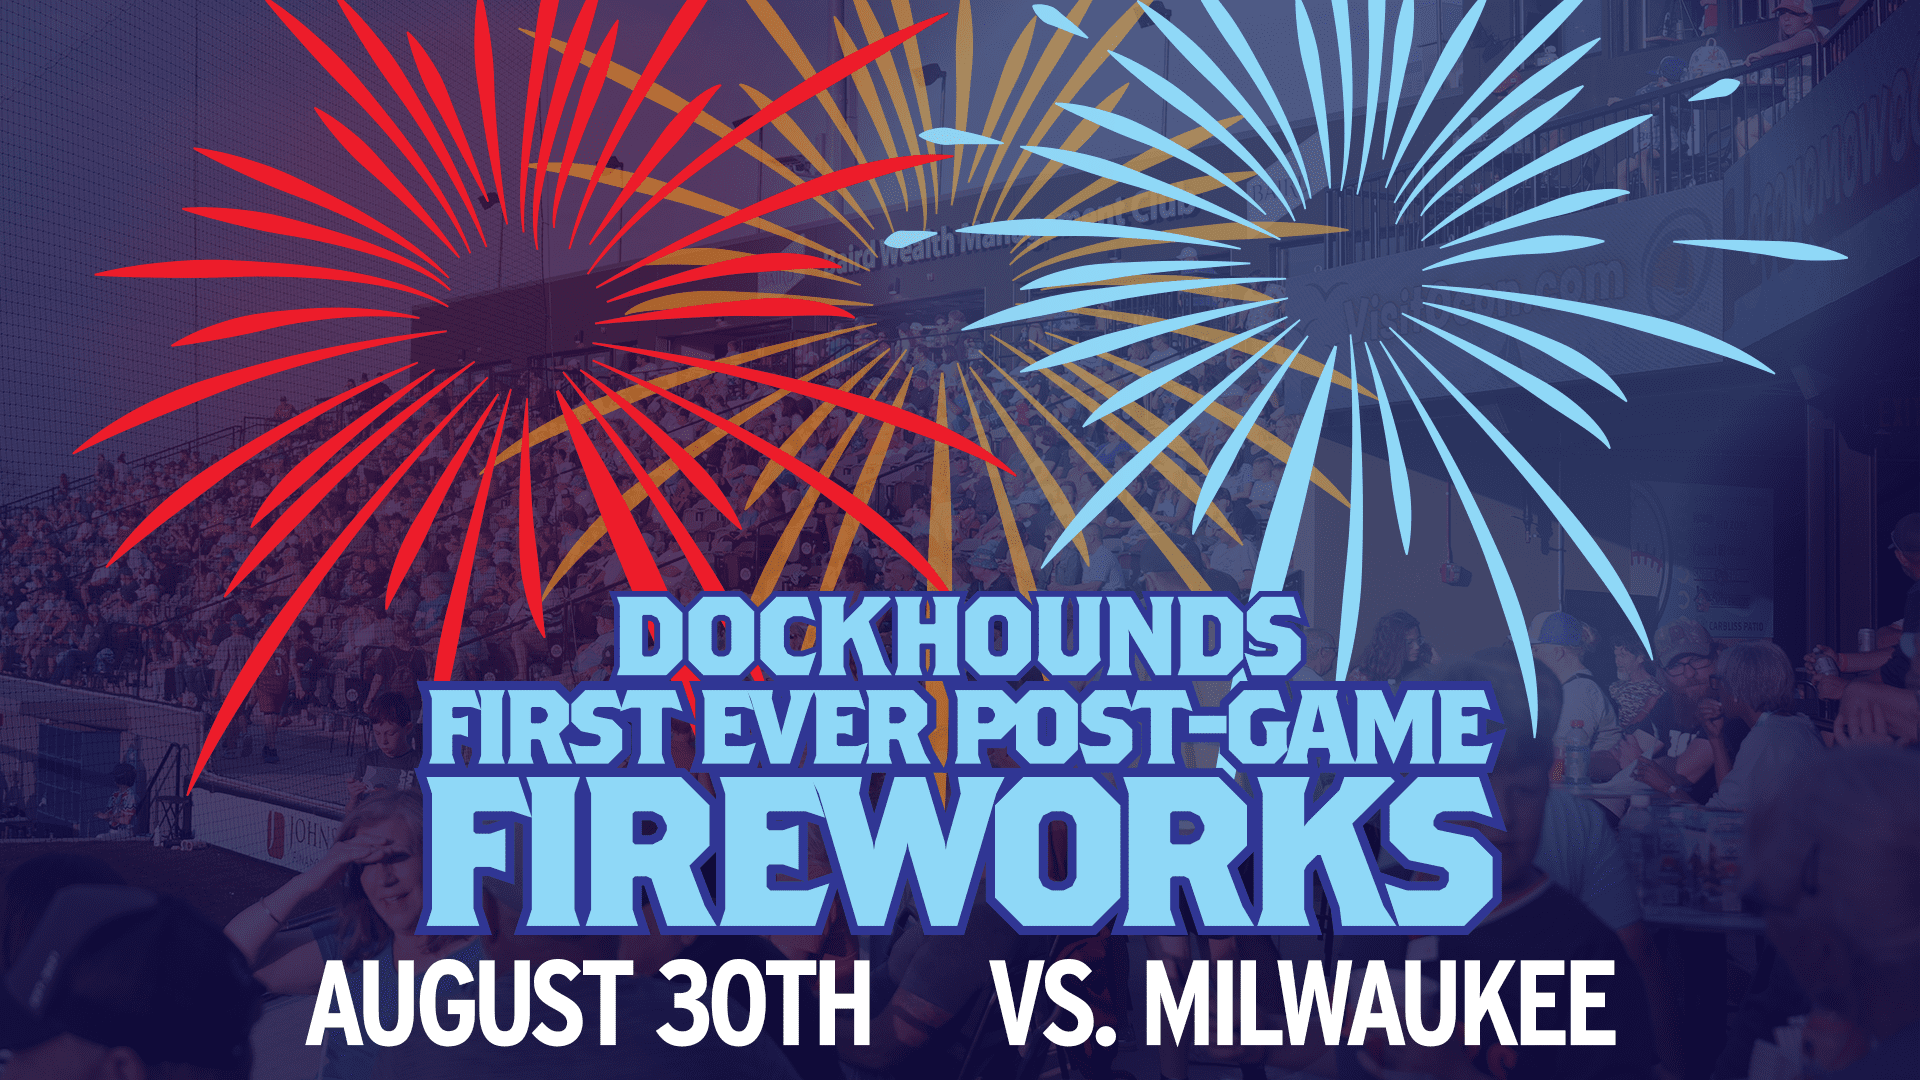 Fireworks night with the DockHounds is August 30